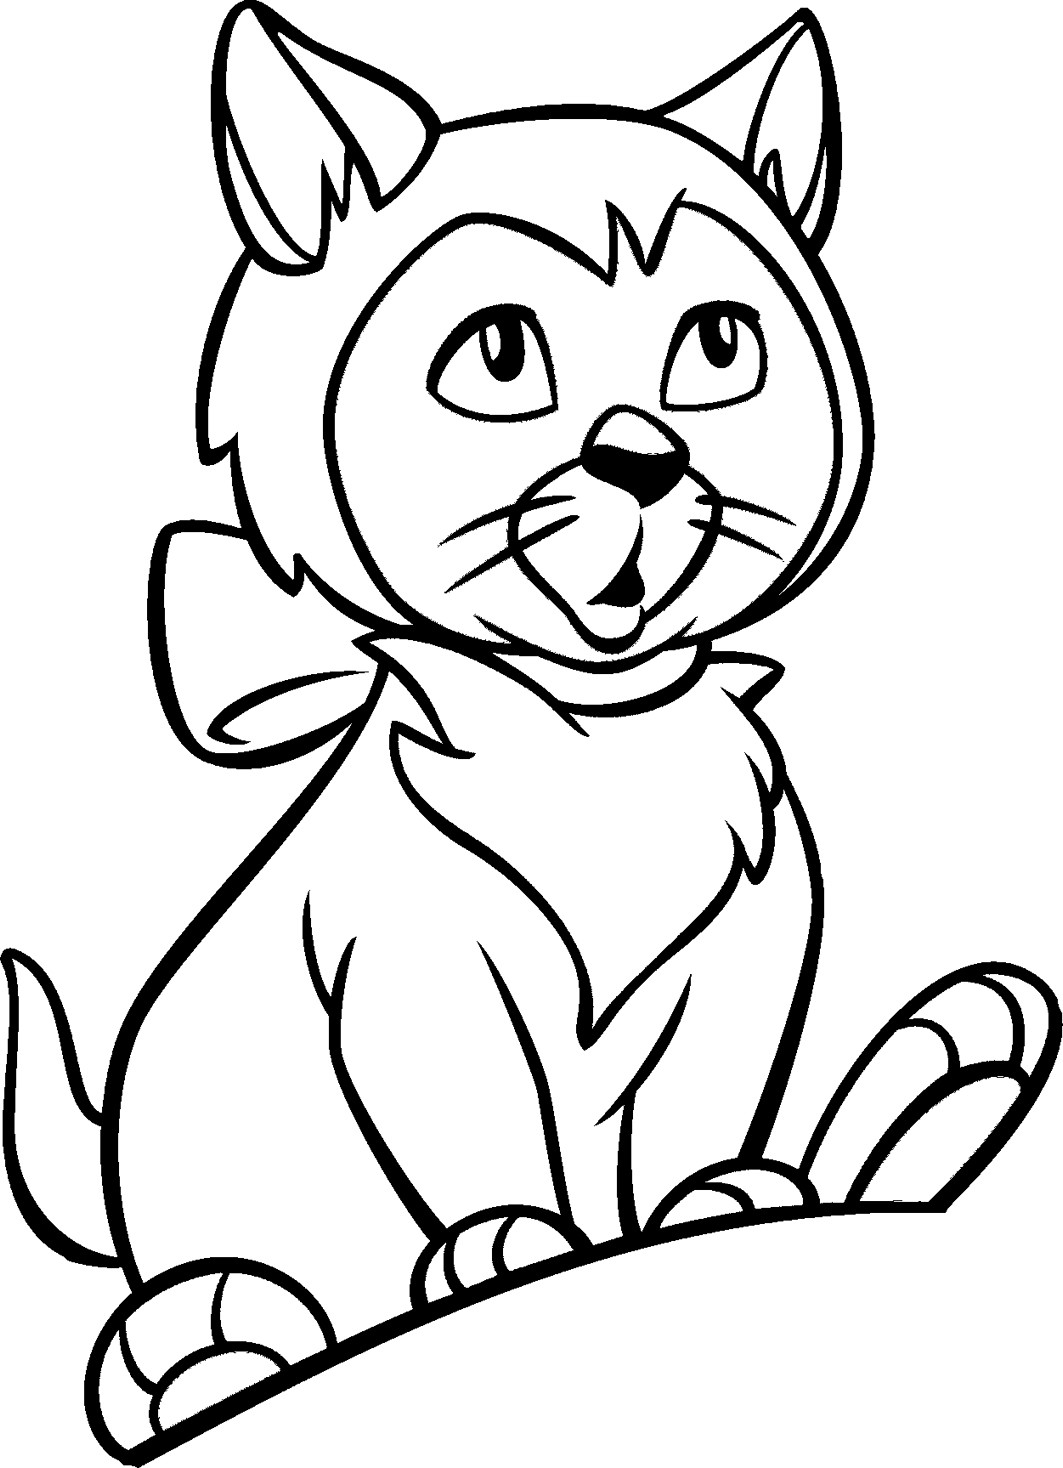 Coloring Page For Kids
 Coloring Pages for Kids Cat Coloring Pages for Kids